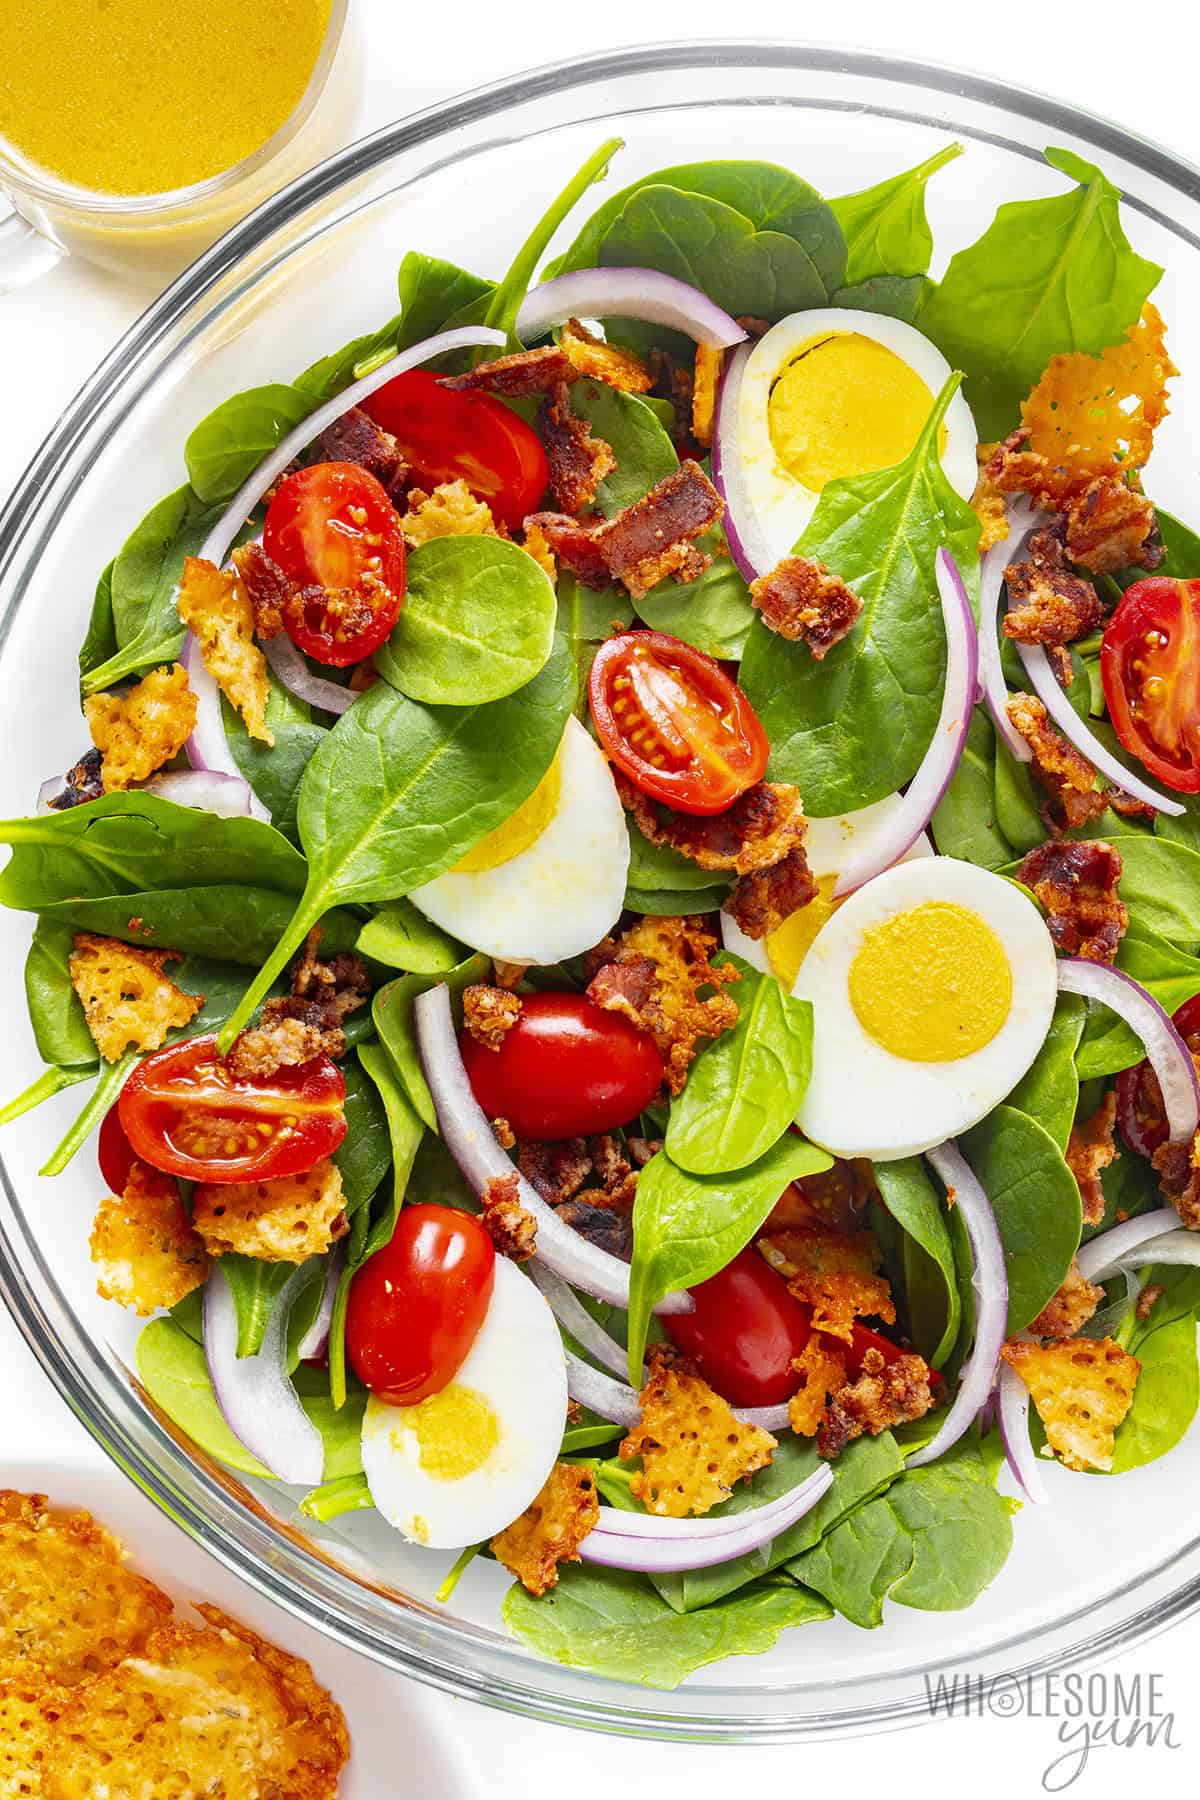 Spinach bacon salad in a large bowl.